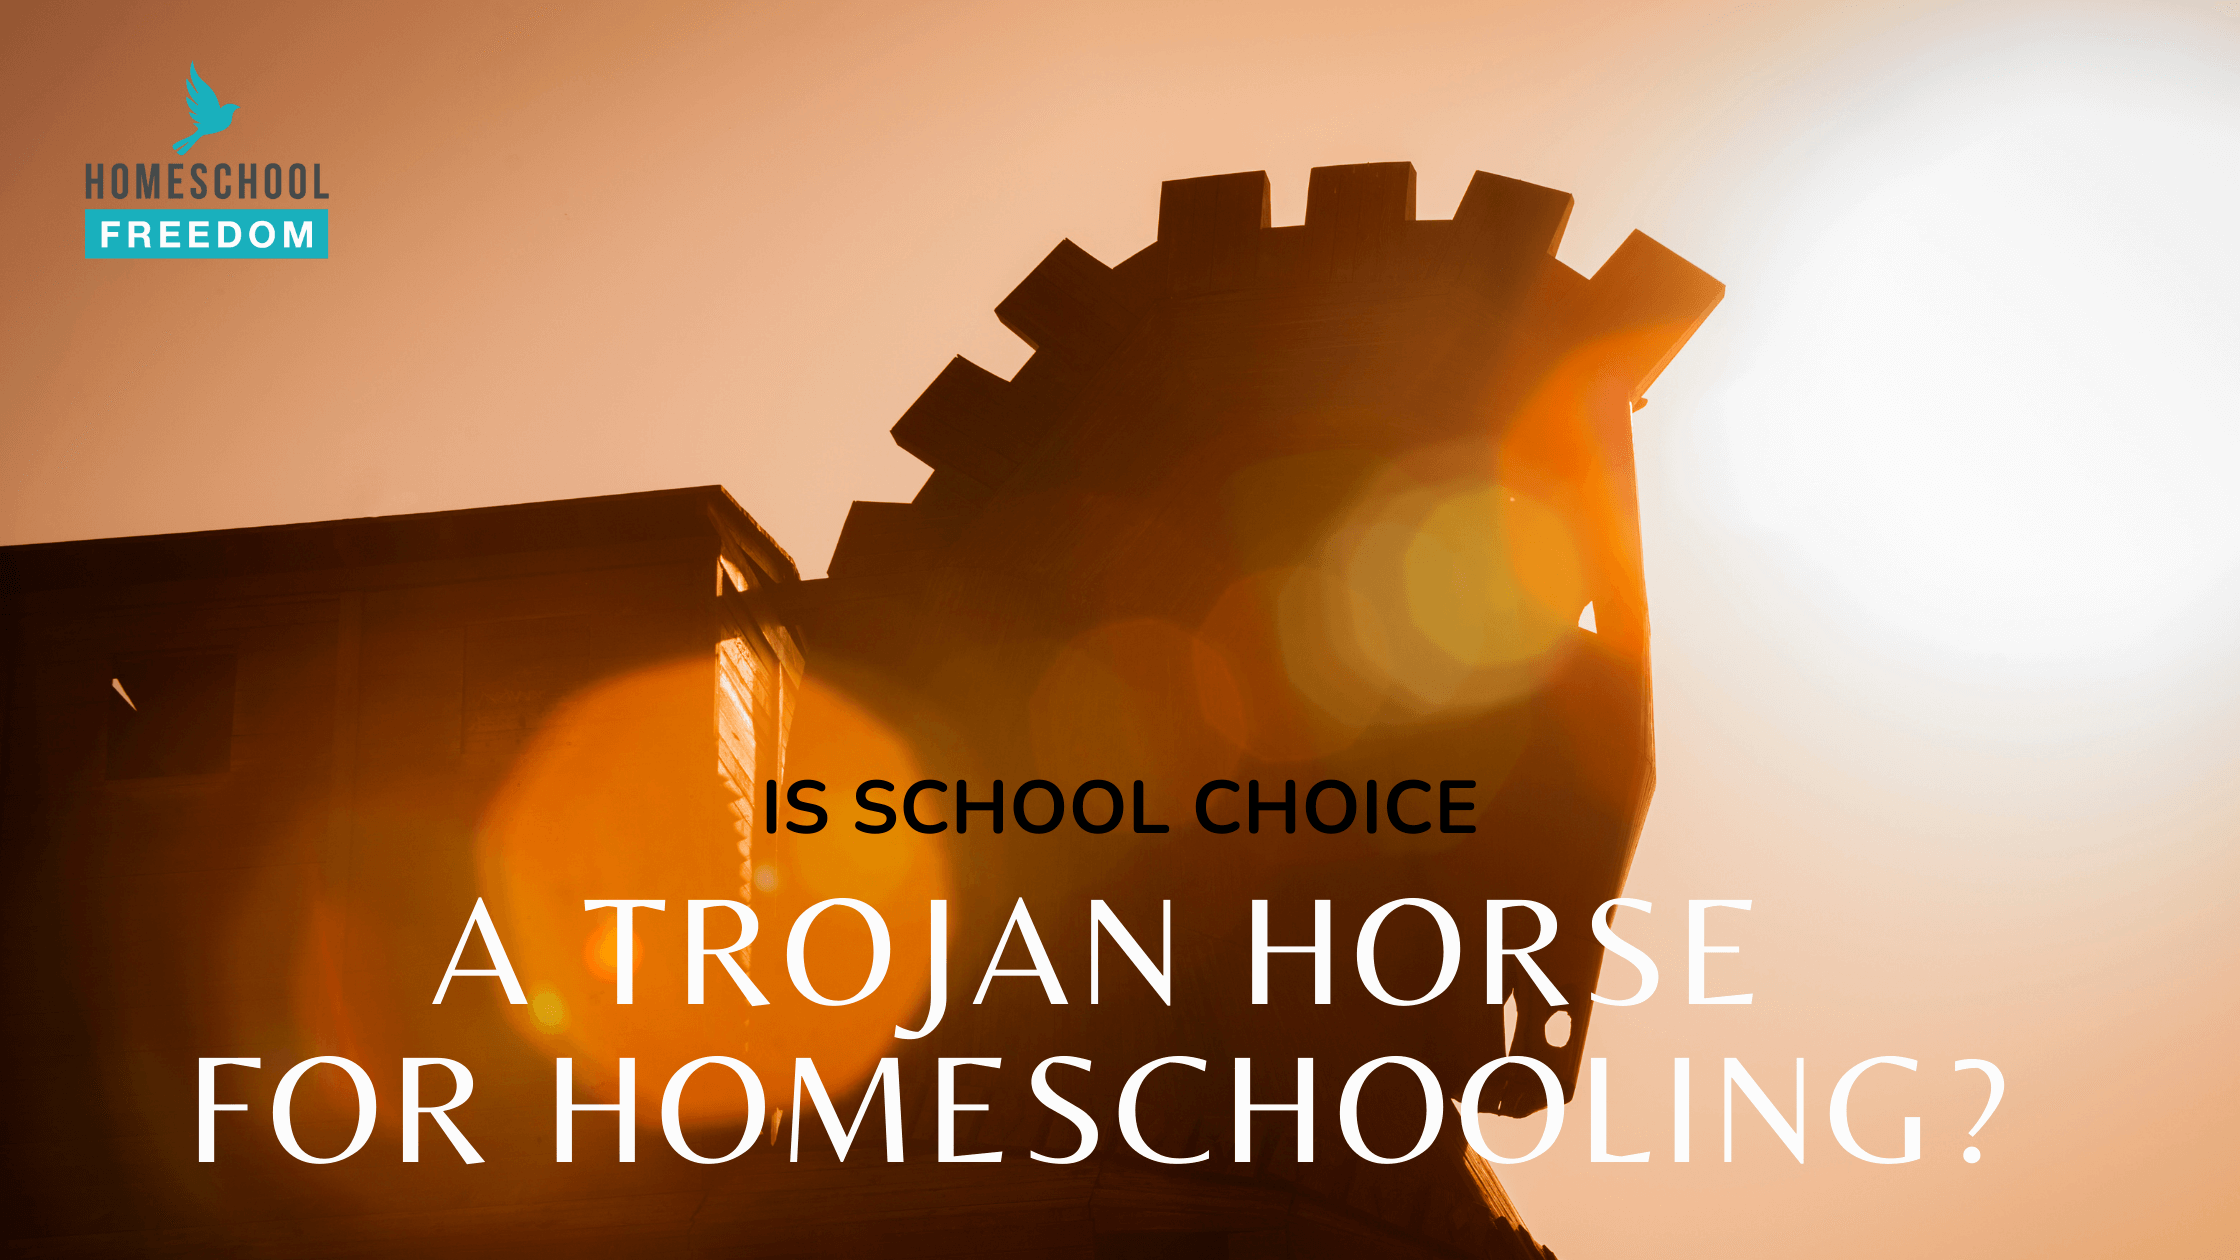 Is School Choice a Trojan Horse for Homeschooling?